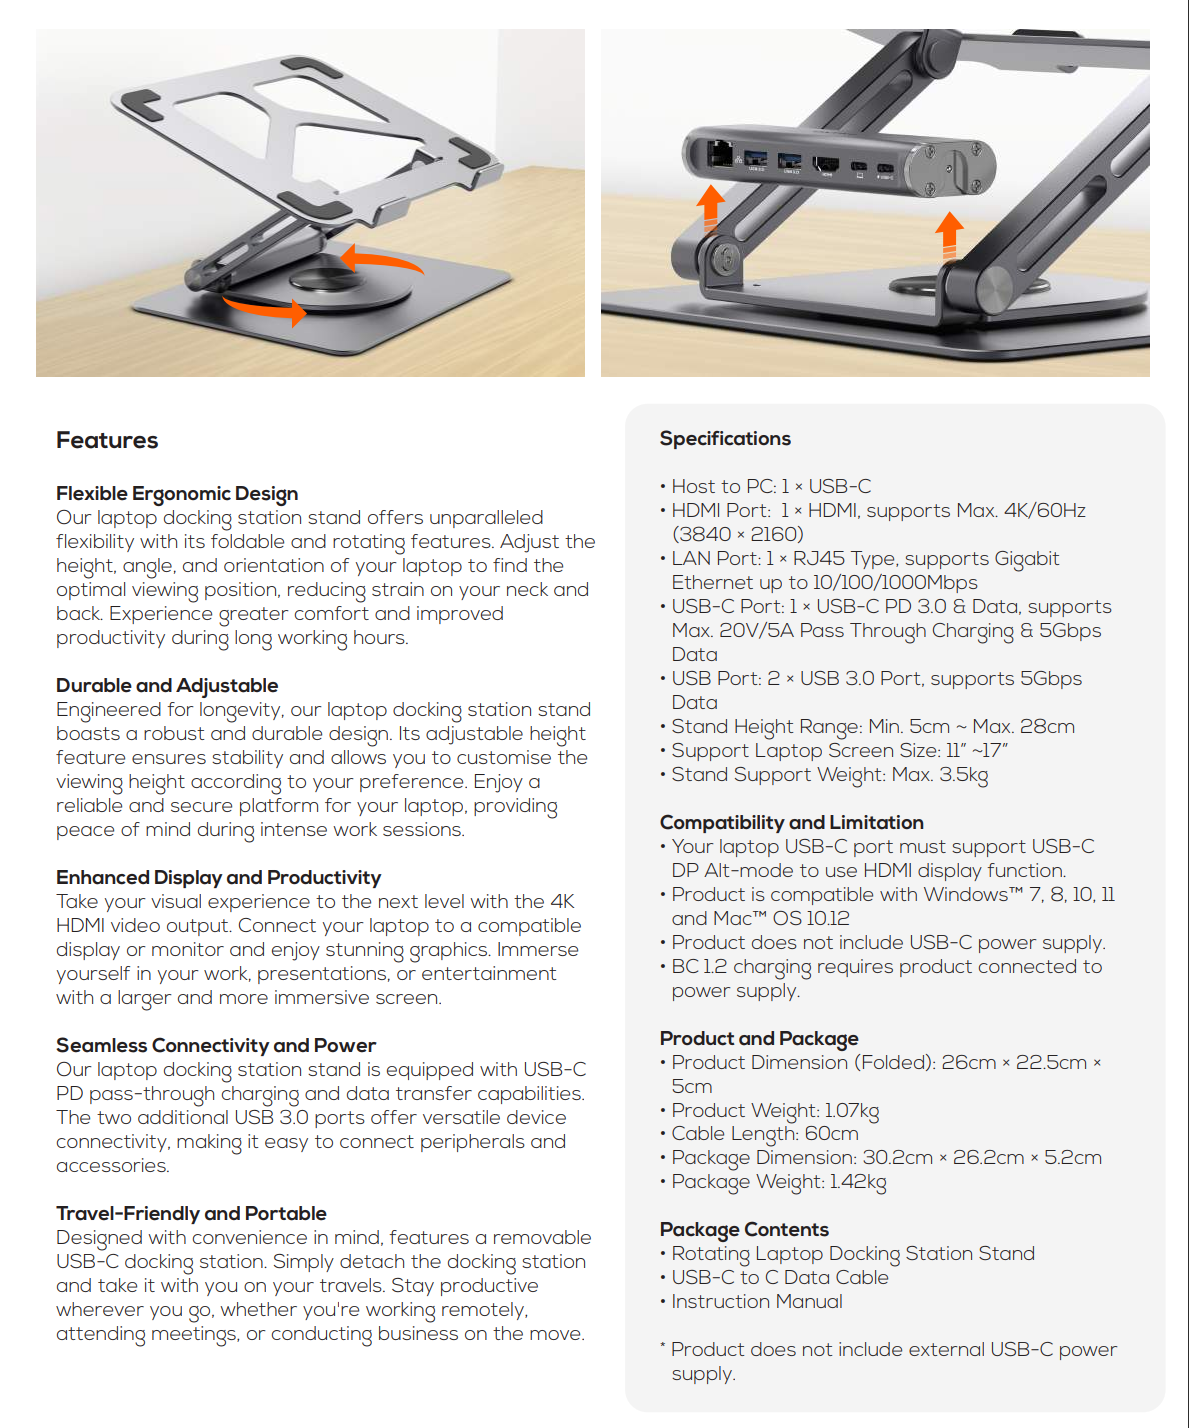 A large marketing image providing additional information about the product mBeat Stage S12 Rotating Laptop Stand with USB-C Docking Station - Additional alt info not provided